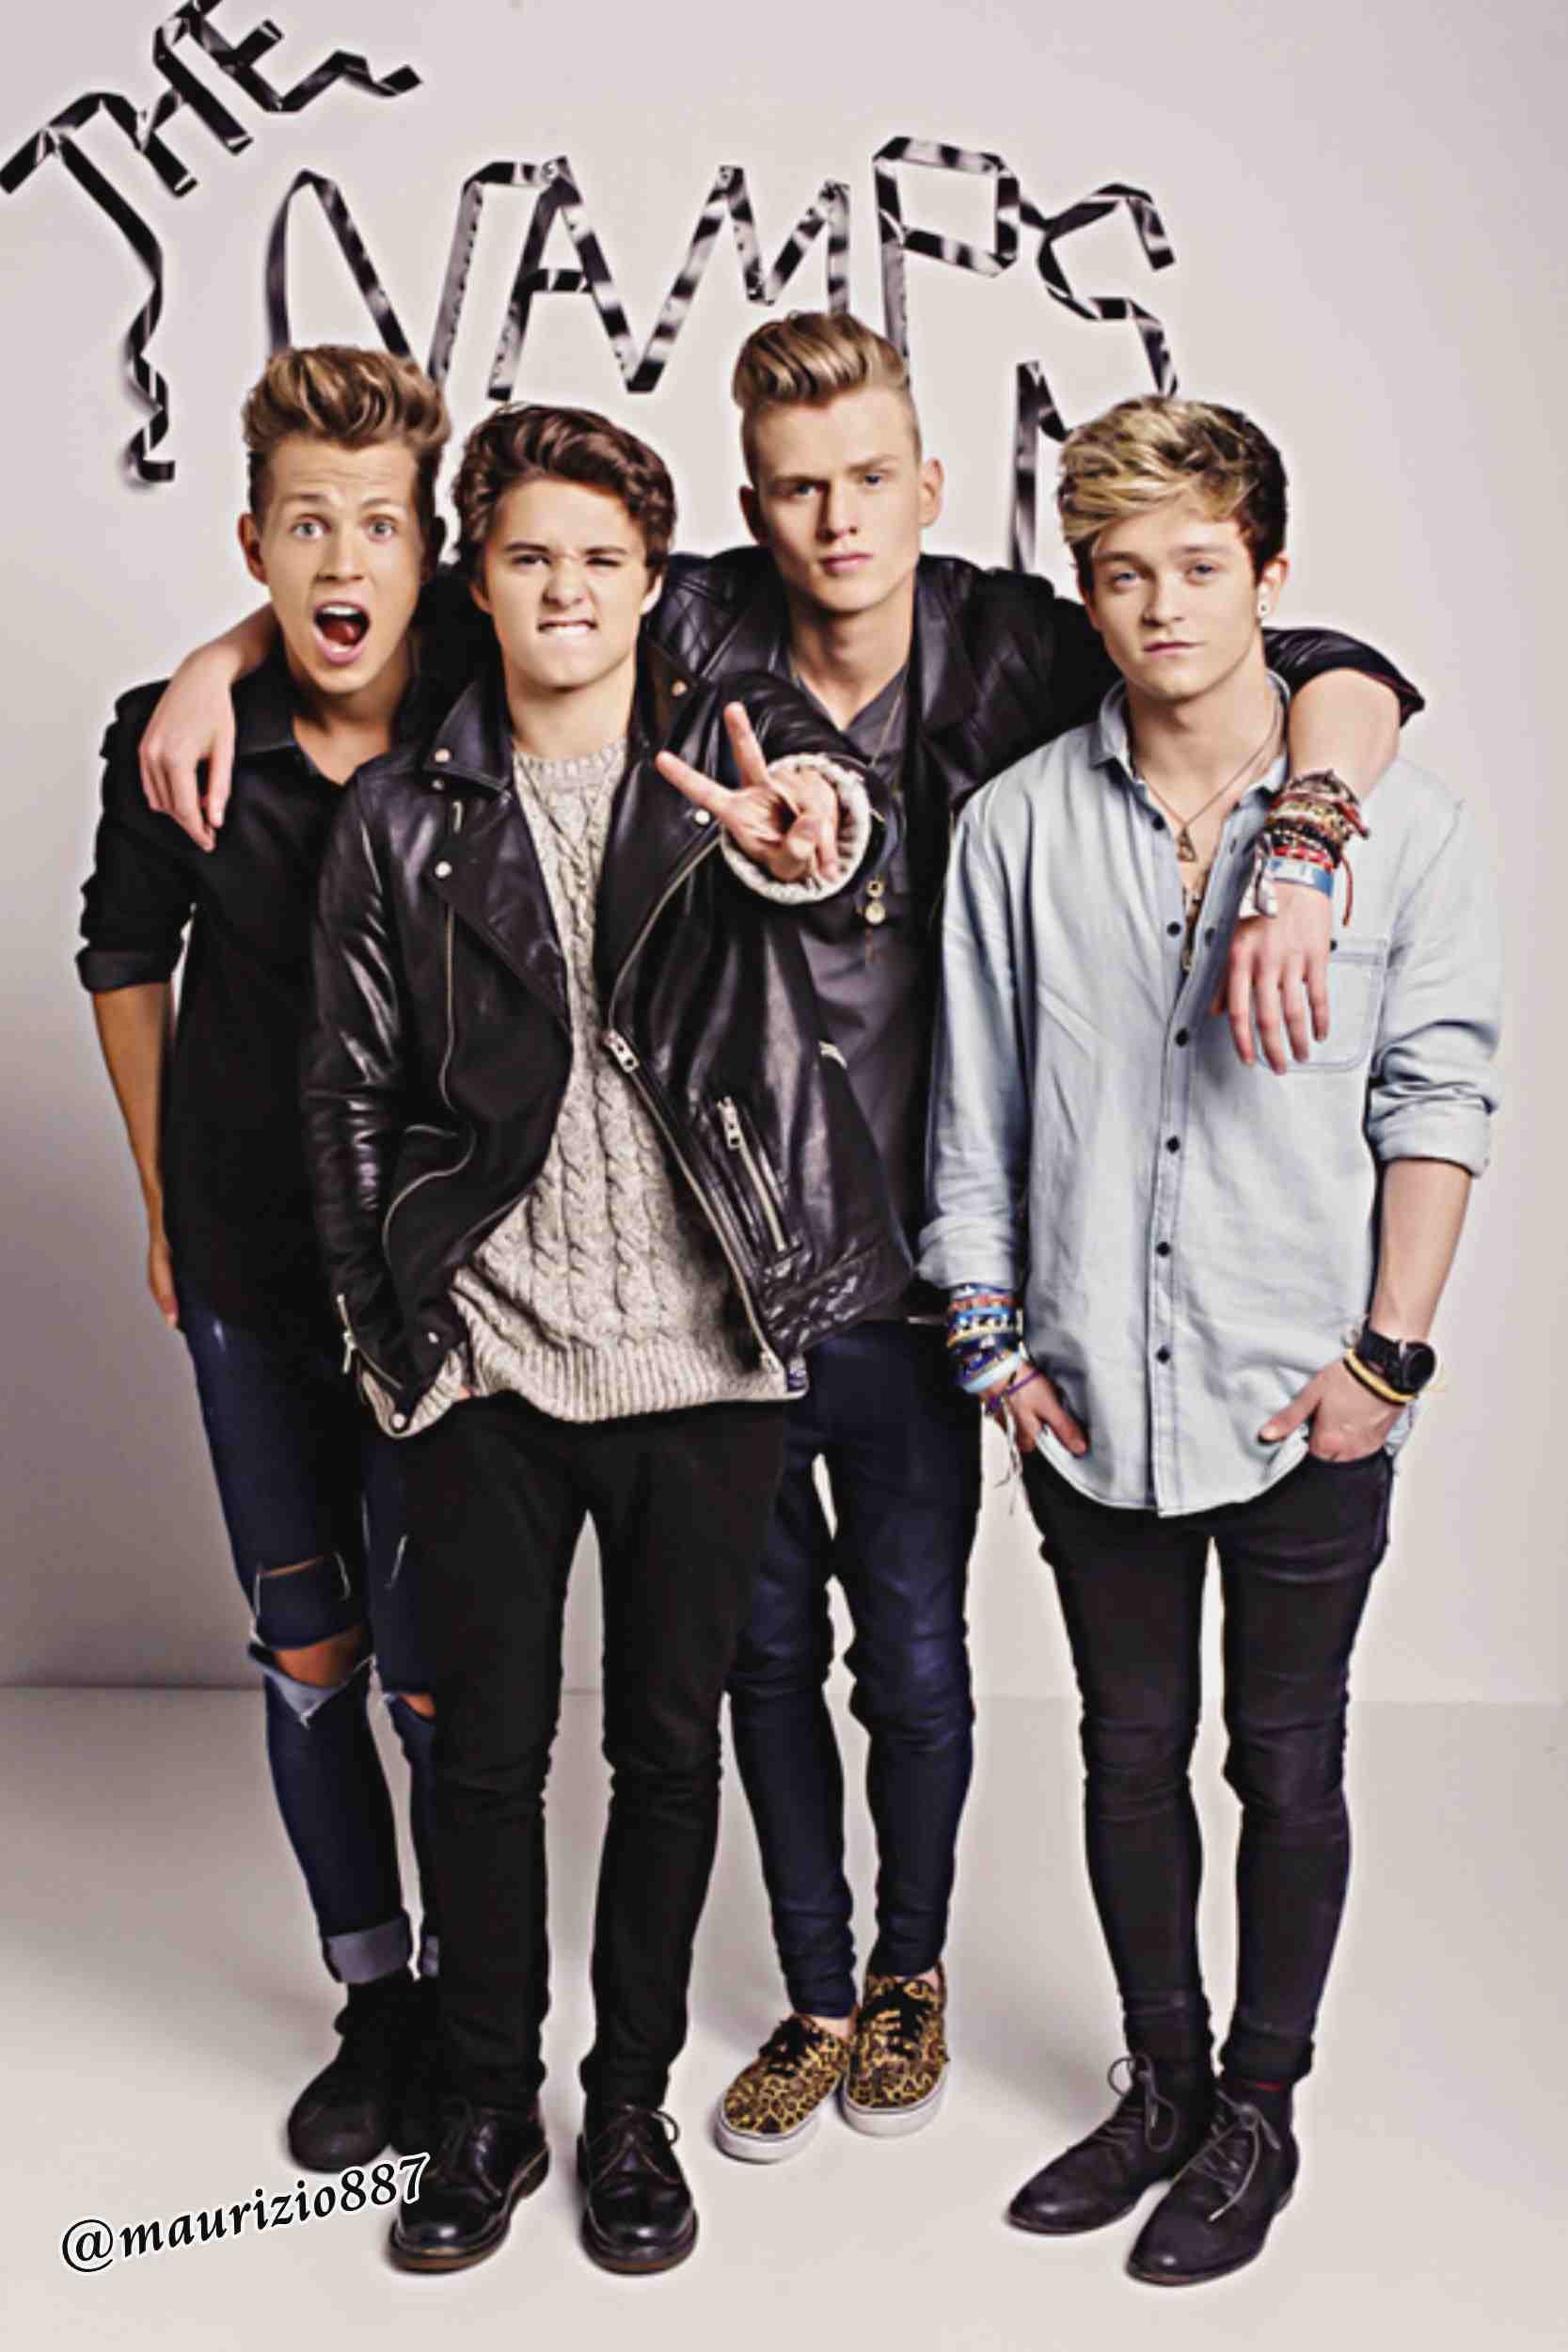 The Vamps Wallpapers 63 Pictures